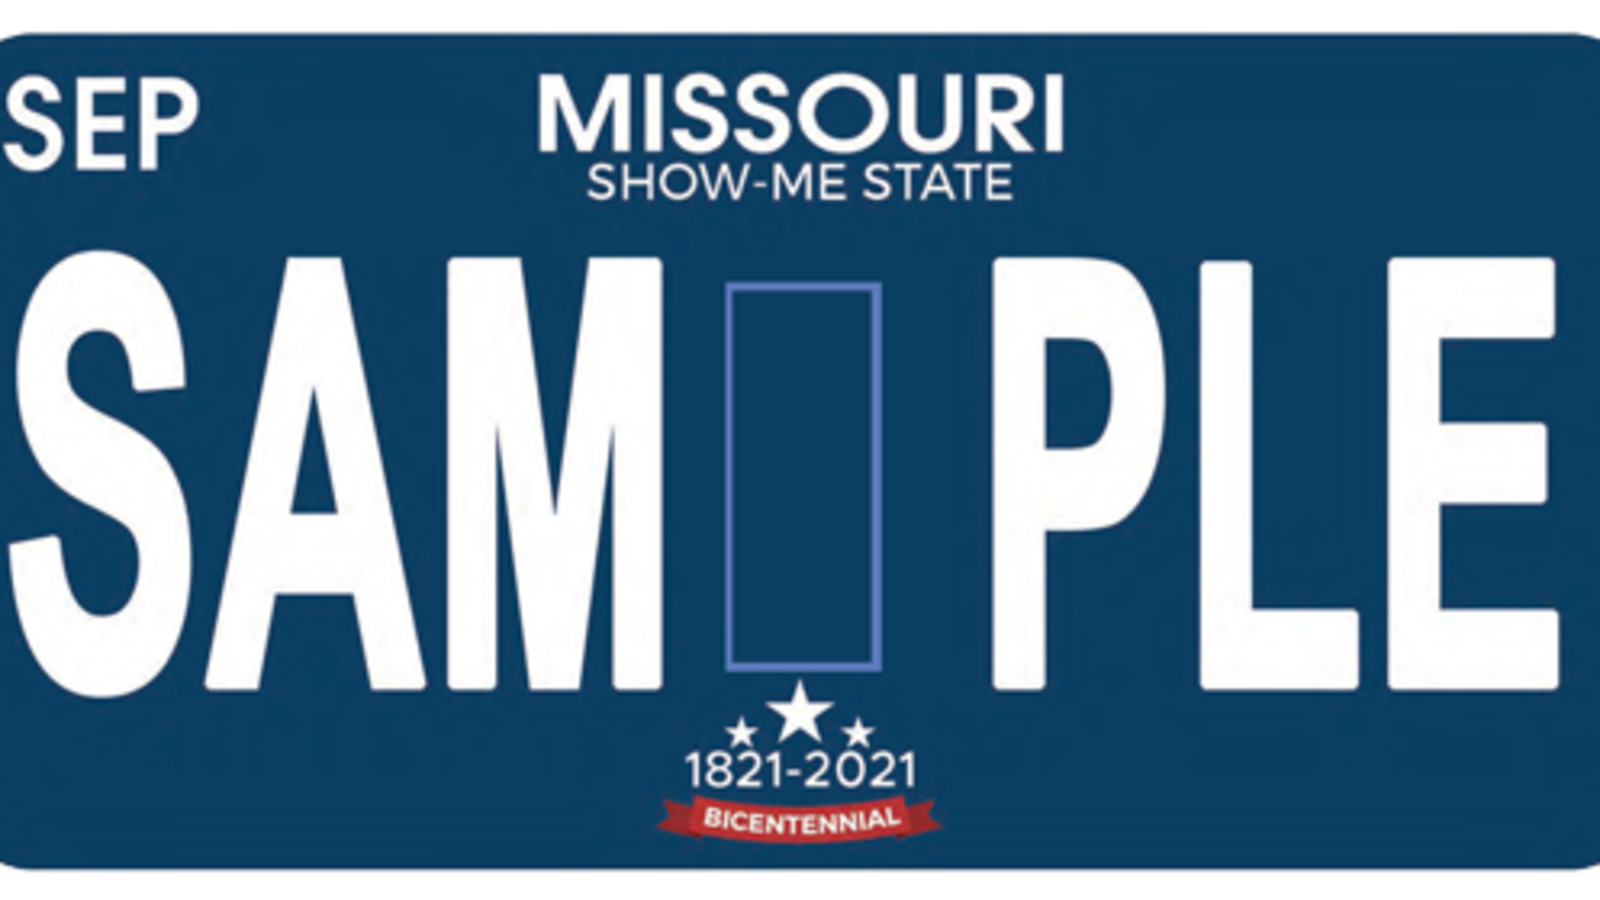 Illustration for article titled I’m starting to see new MO plates.